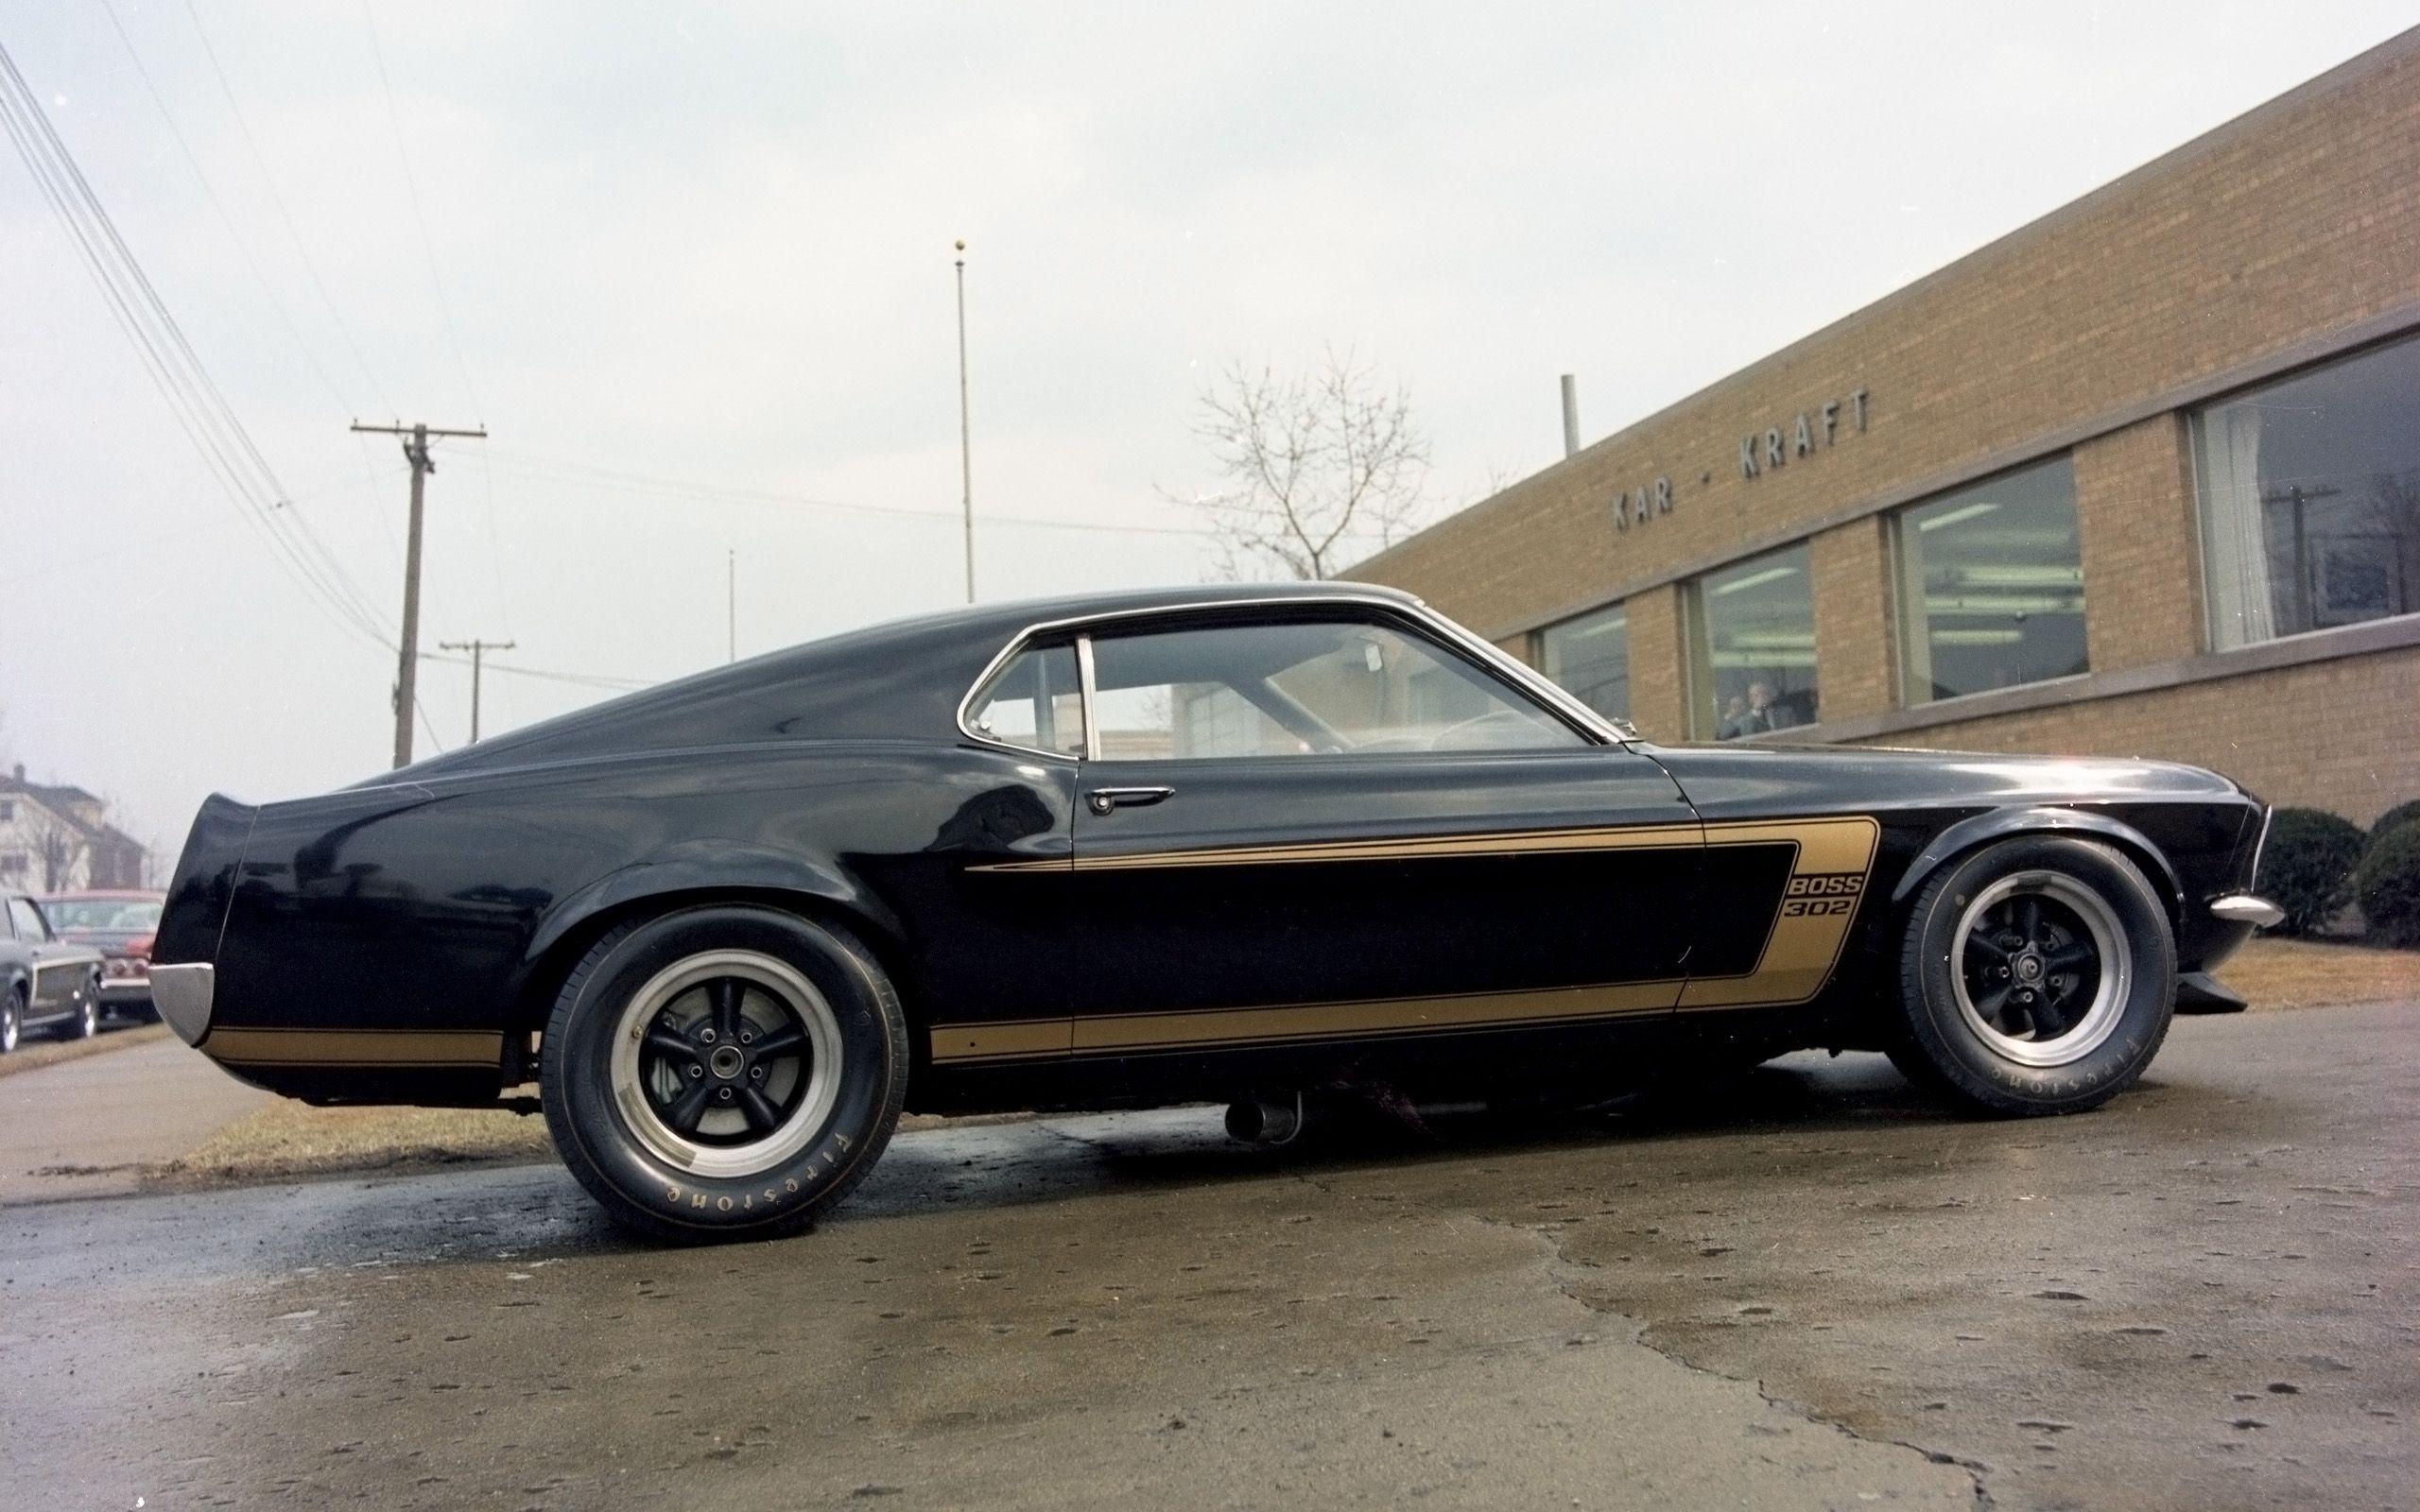 1969 Ford Mustang Boss 302 Black And Gold. Mustang Boss 302